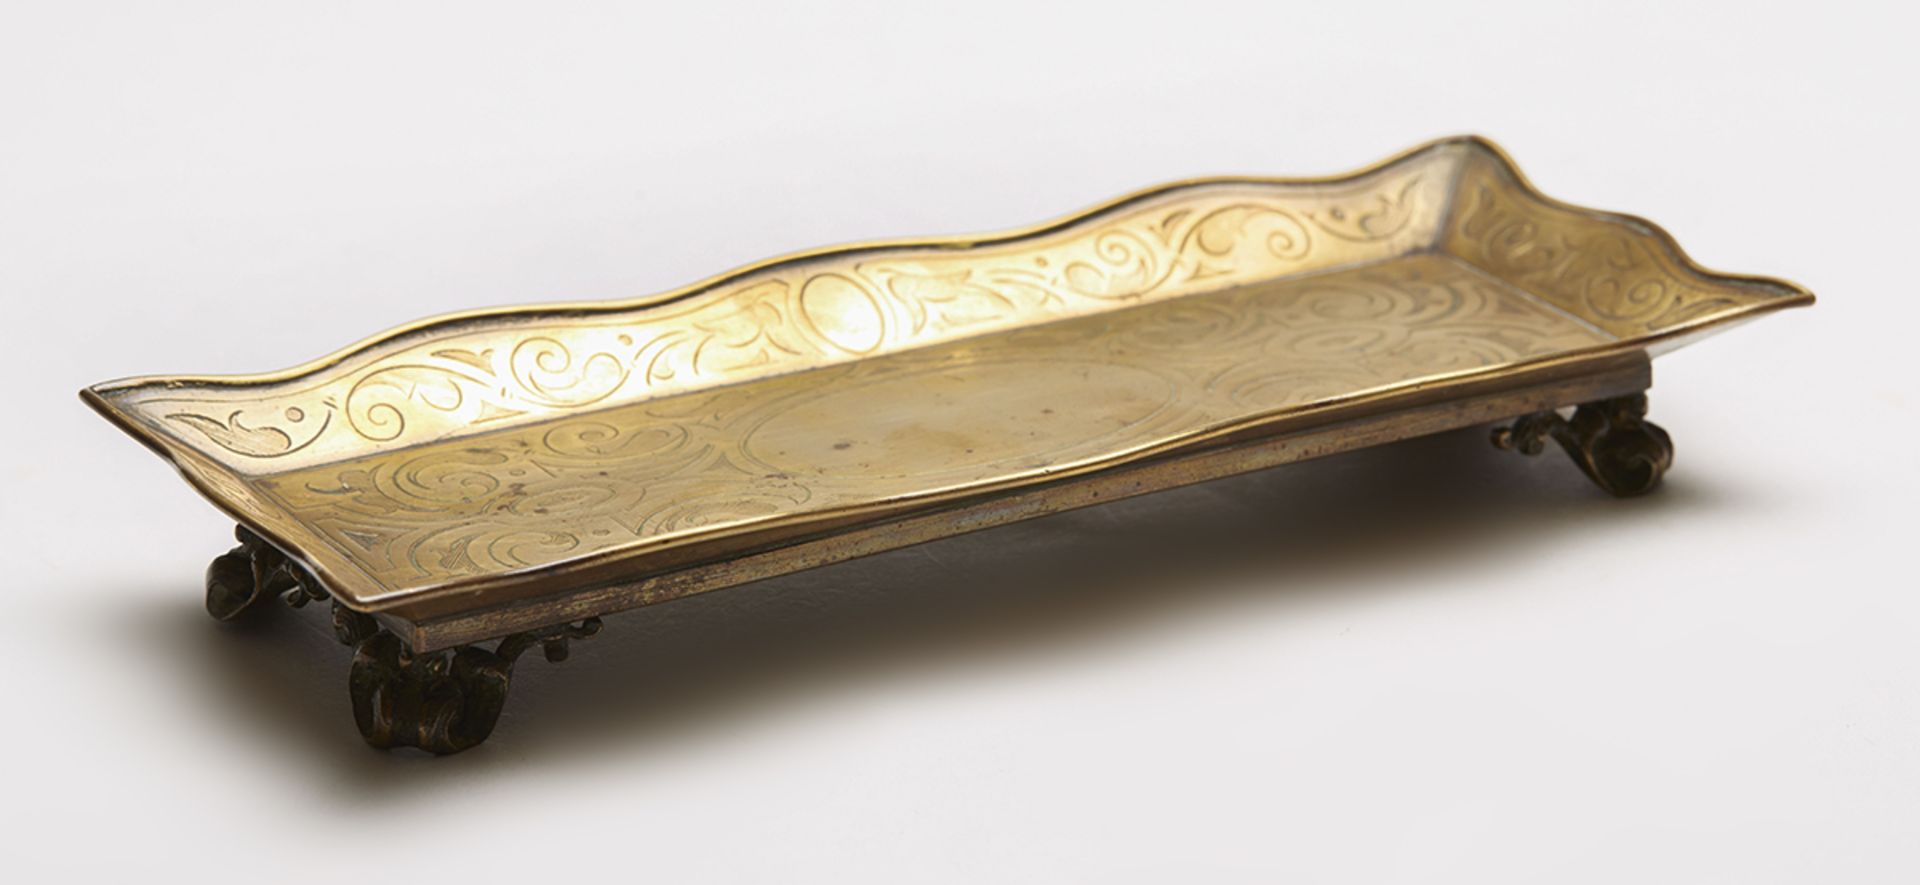 ARTS & CRAFTS ENGRAVED BRASS DESK PEN TRAY c.1890   DIMENSIONS   Length 22cm, Height 3cm   CONDITION - Image 2 of 7